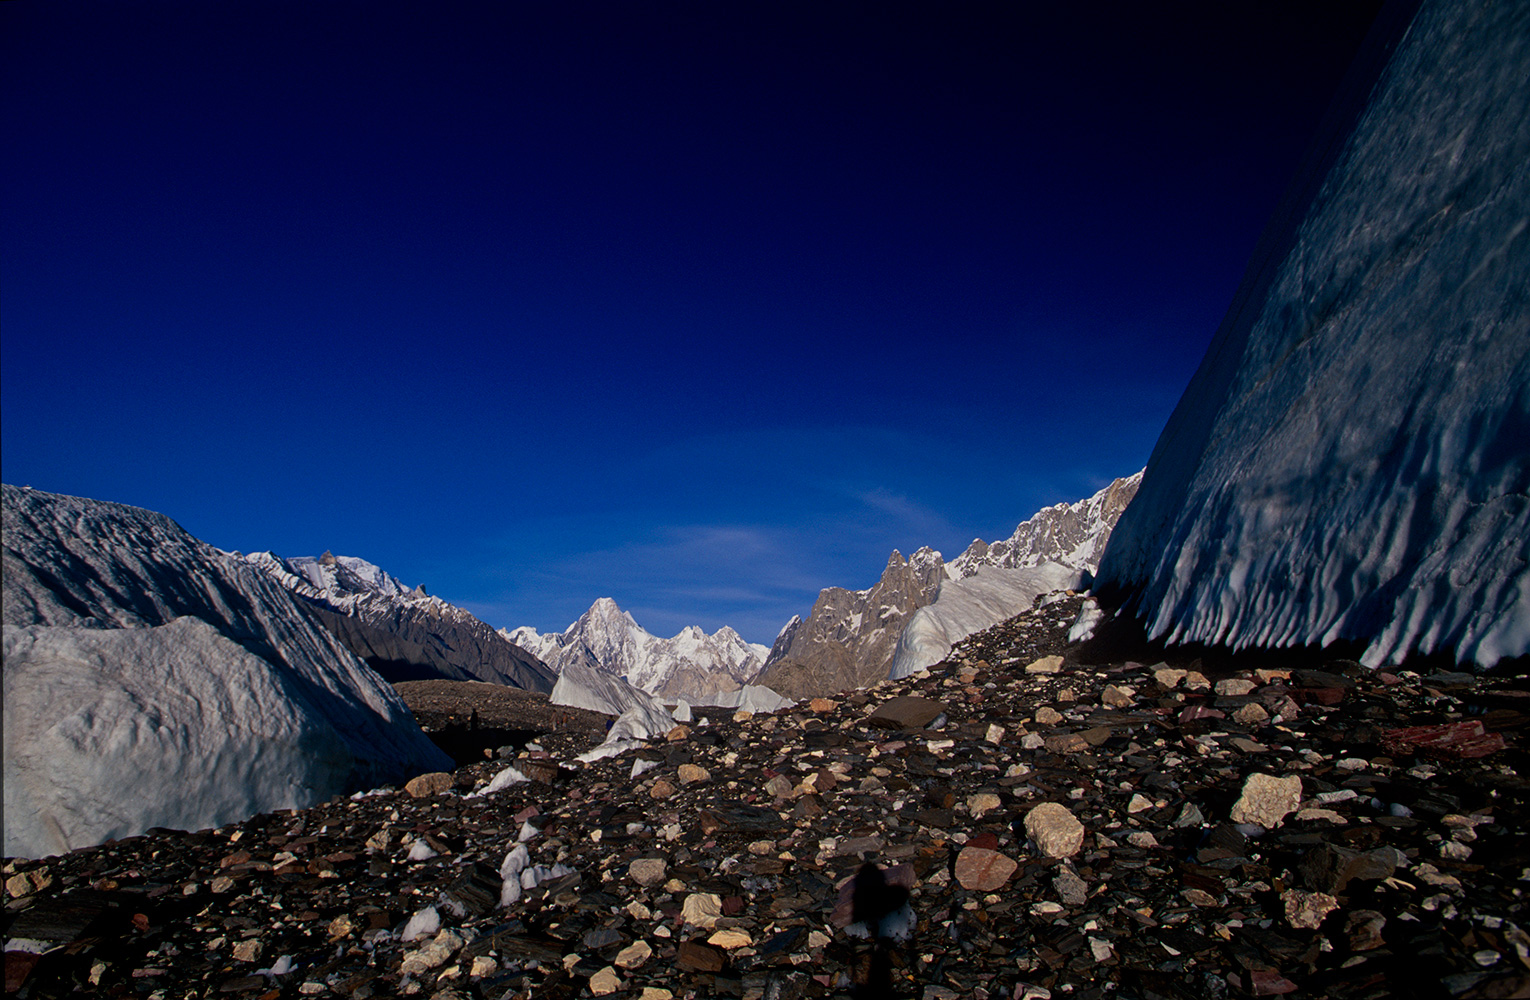 With Gasherbrum IV on the horizon